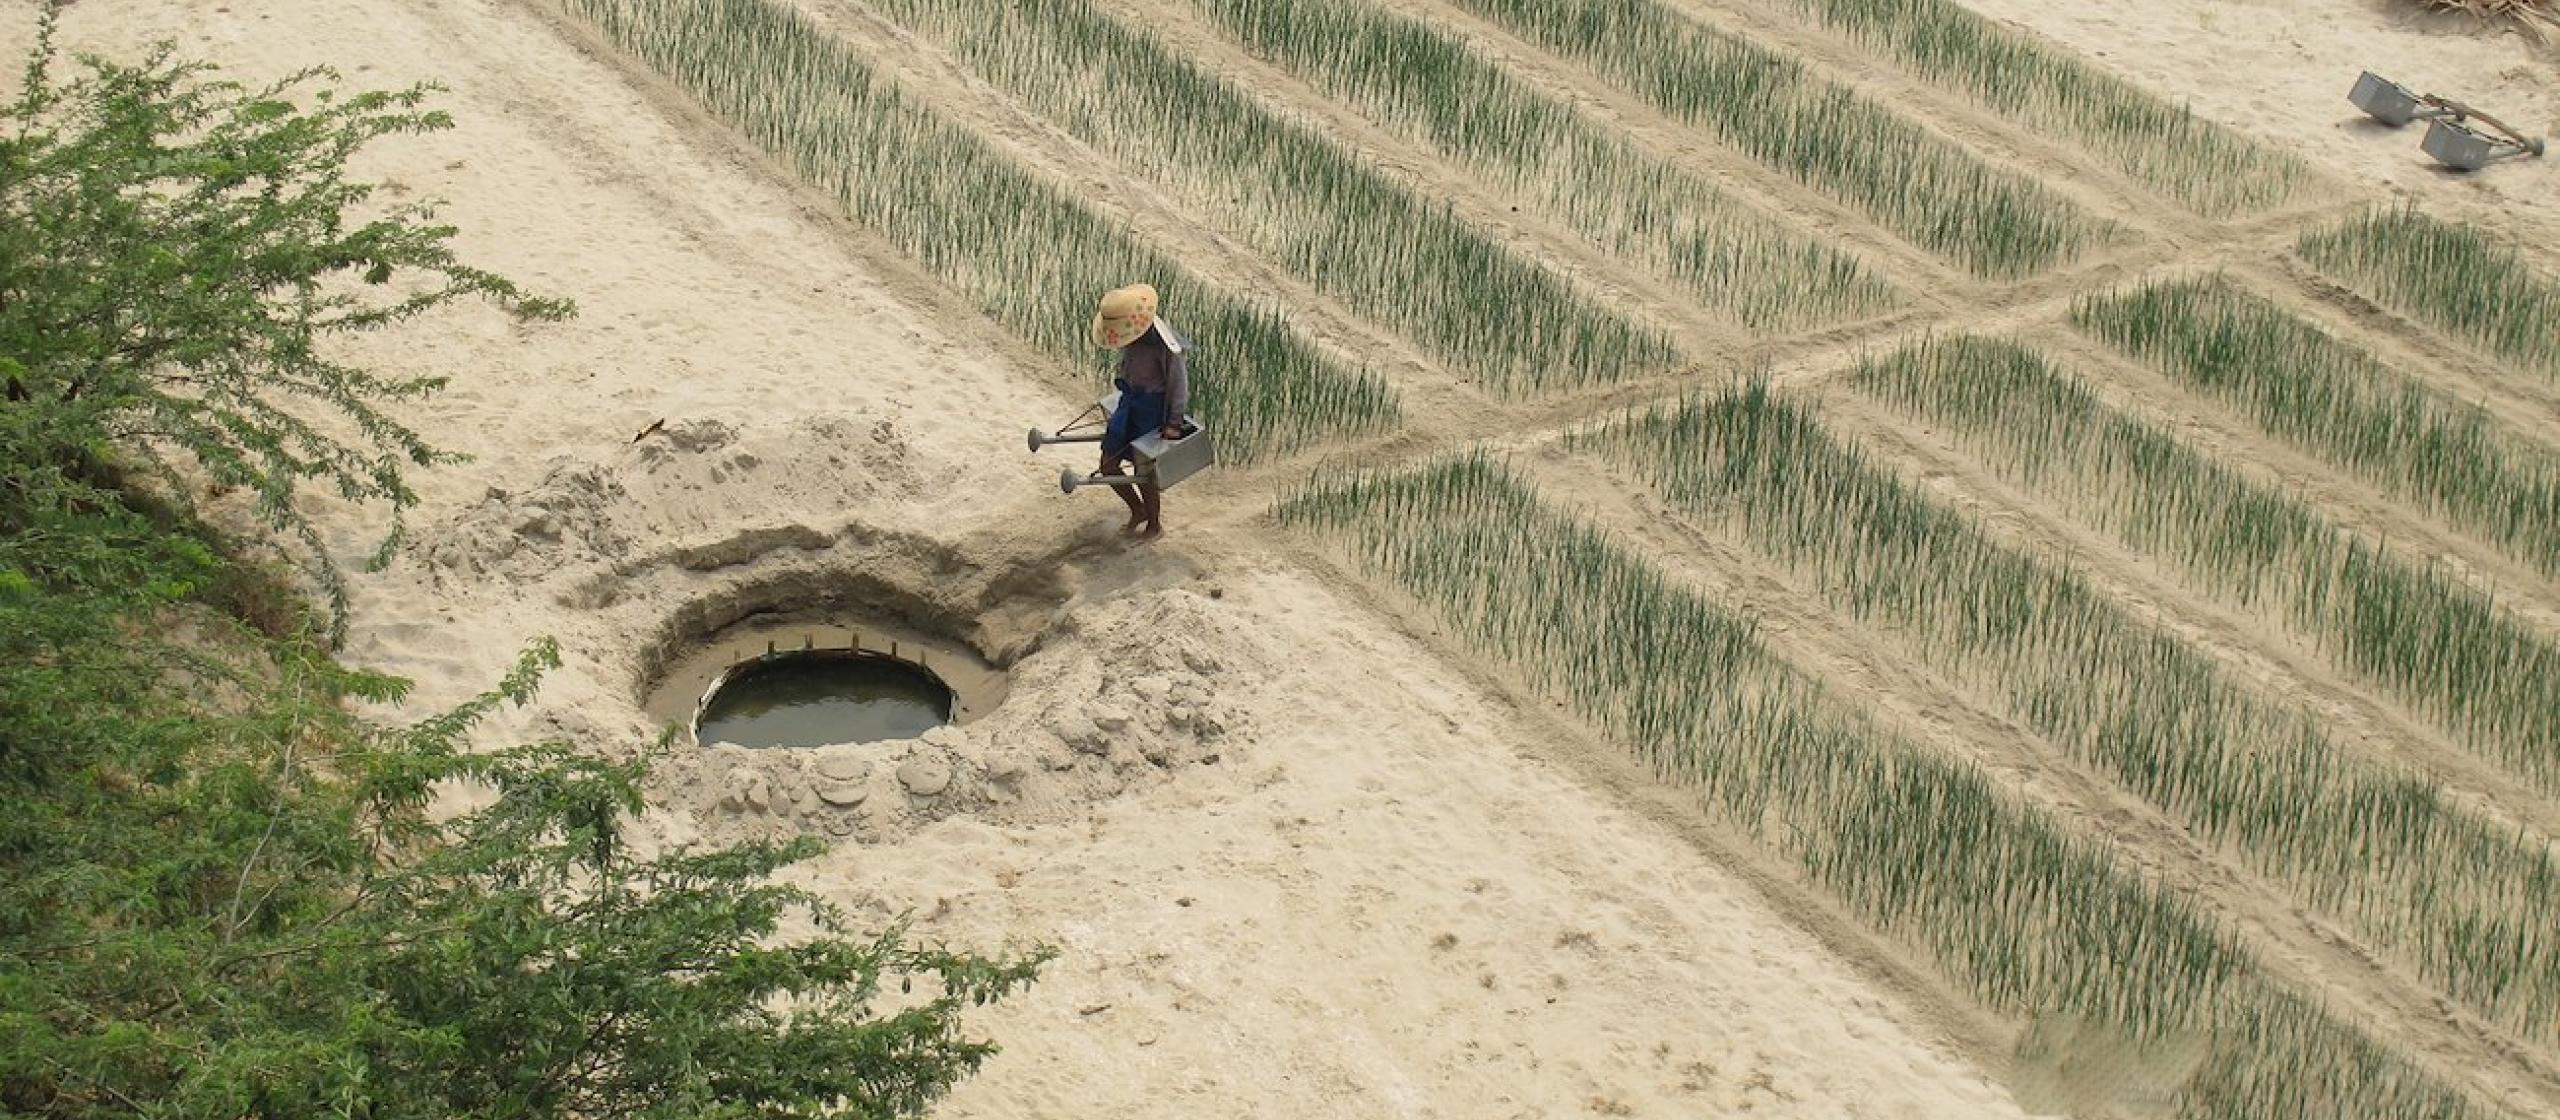 Shallow dug wells in the bed of a river in the Dry Zone of Myanmar